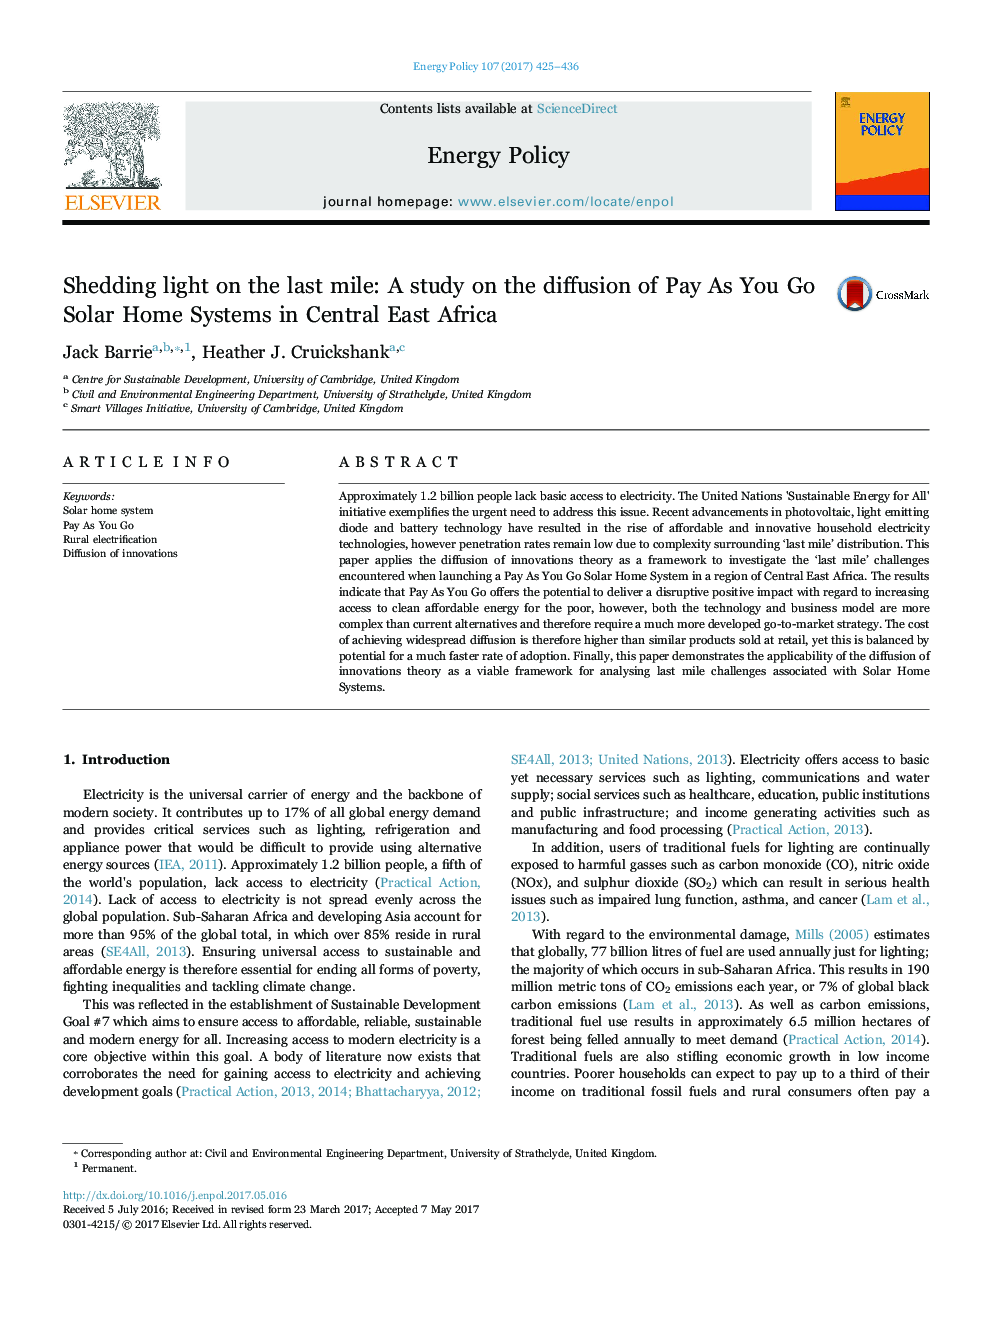 Shedding light on the last mile: A study on the diffusion of Pay As You Go Solar Home Systems in Central East Africa